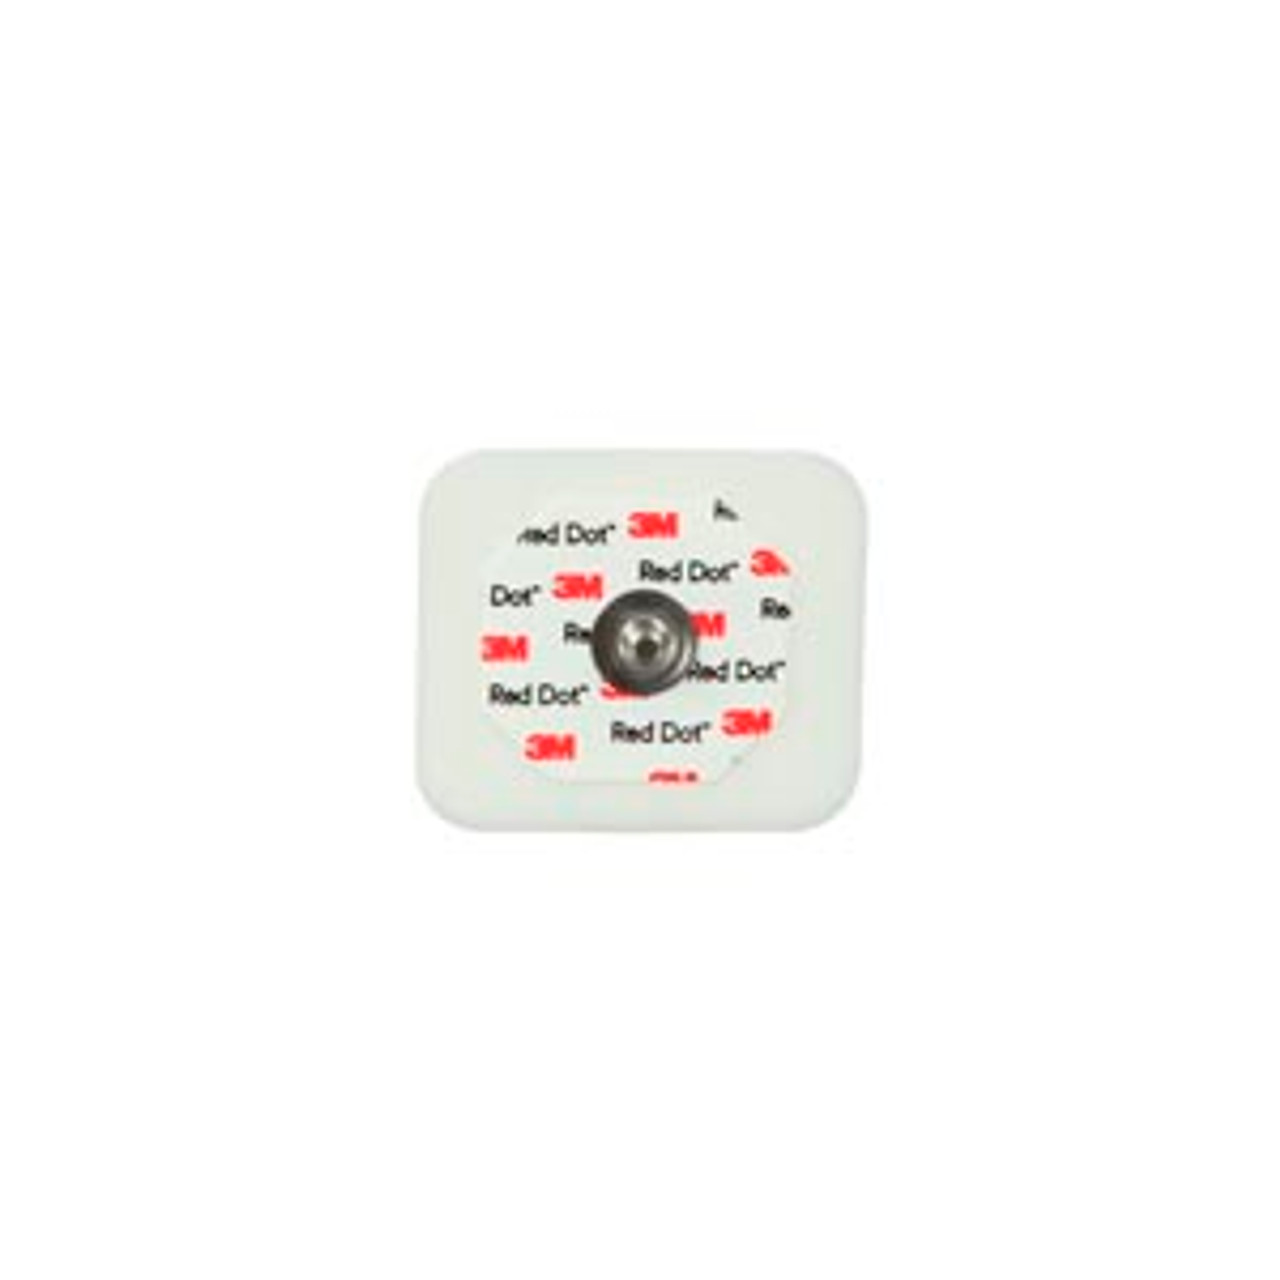 3M RED DOT MONITORING ELECTRODES WITH FOAM TAPE & STICKY GEL, 2560